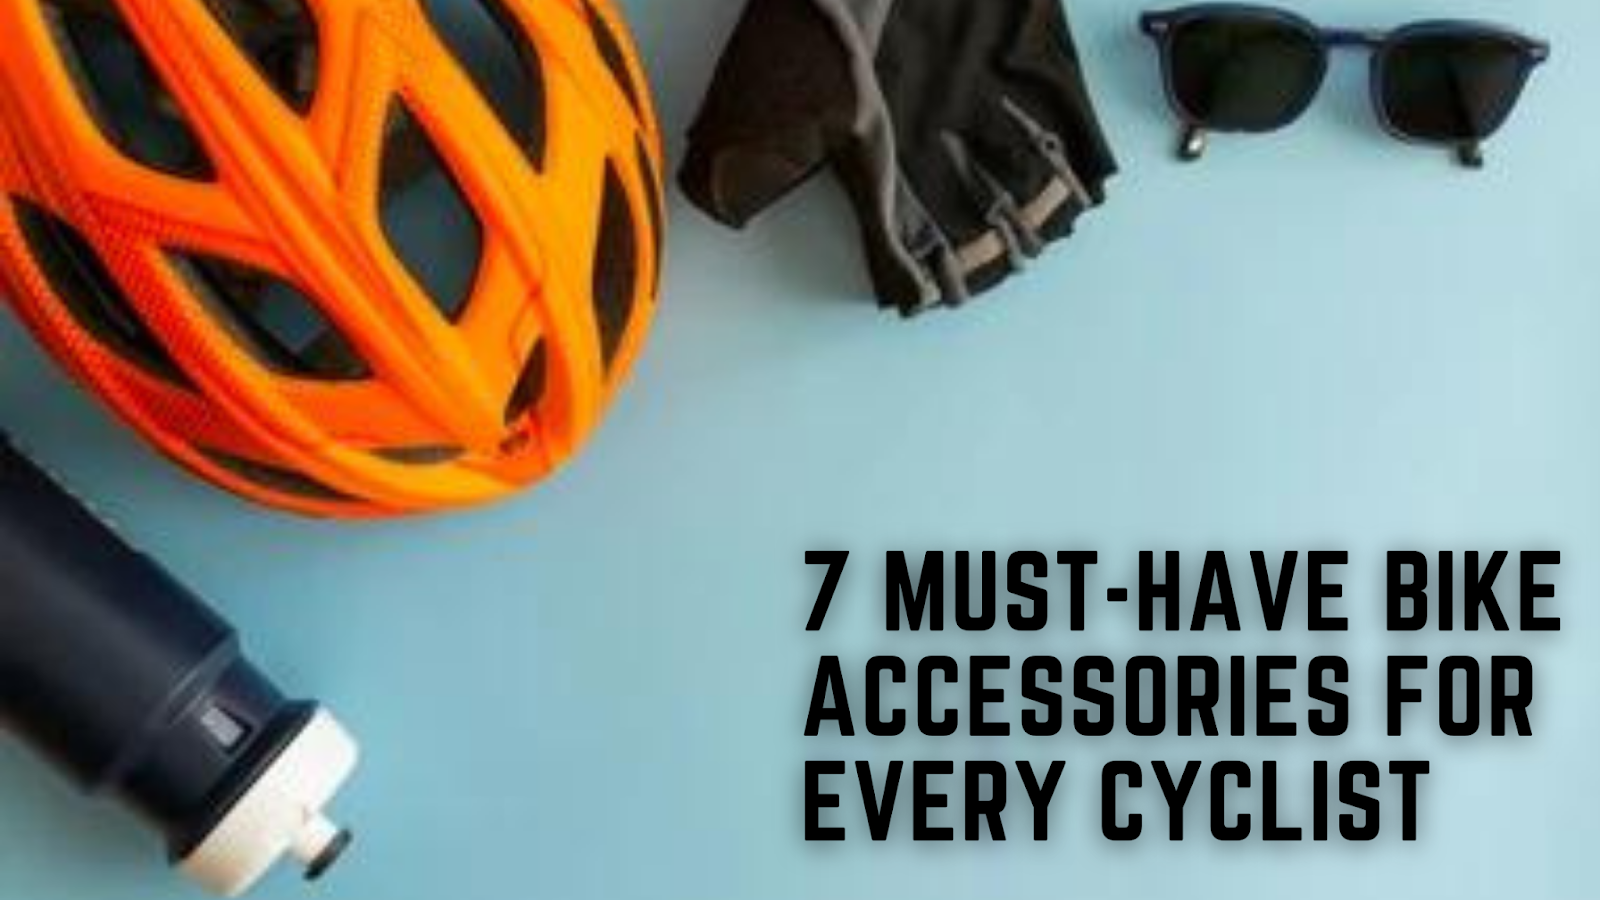 7 Must-Have Bike Accessories for Every Cyclist